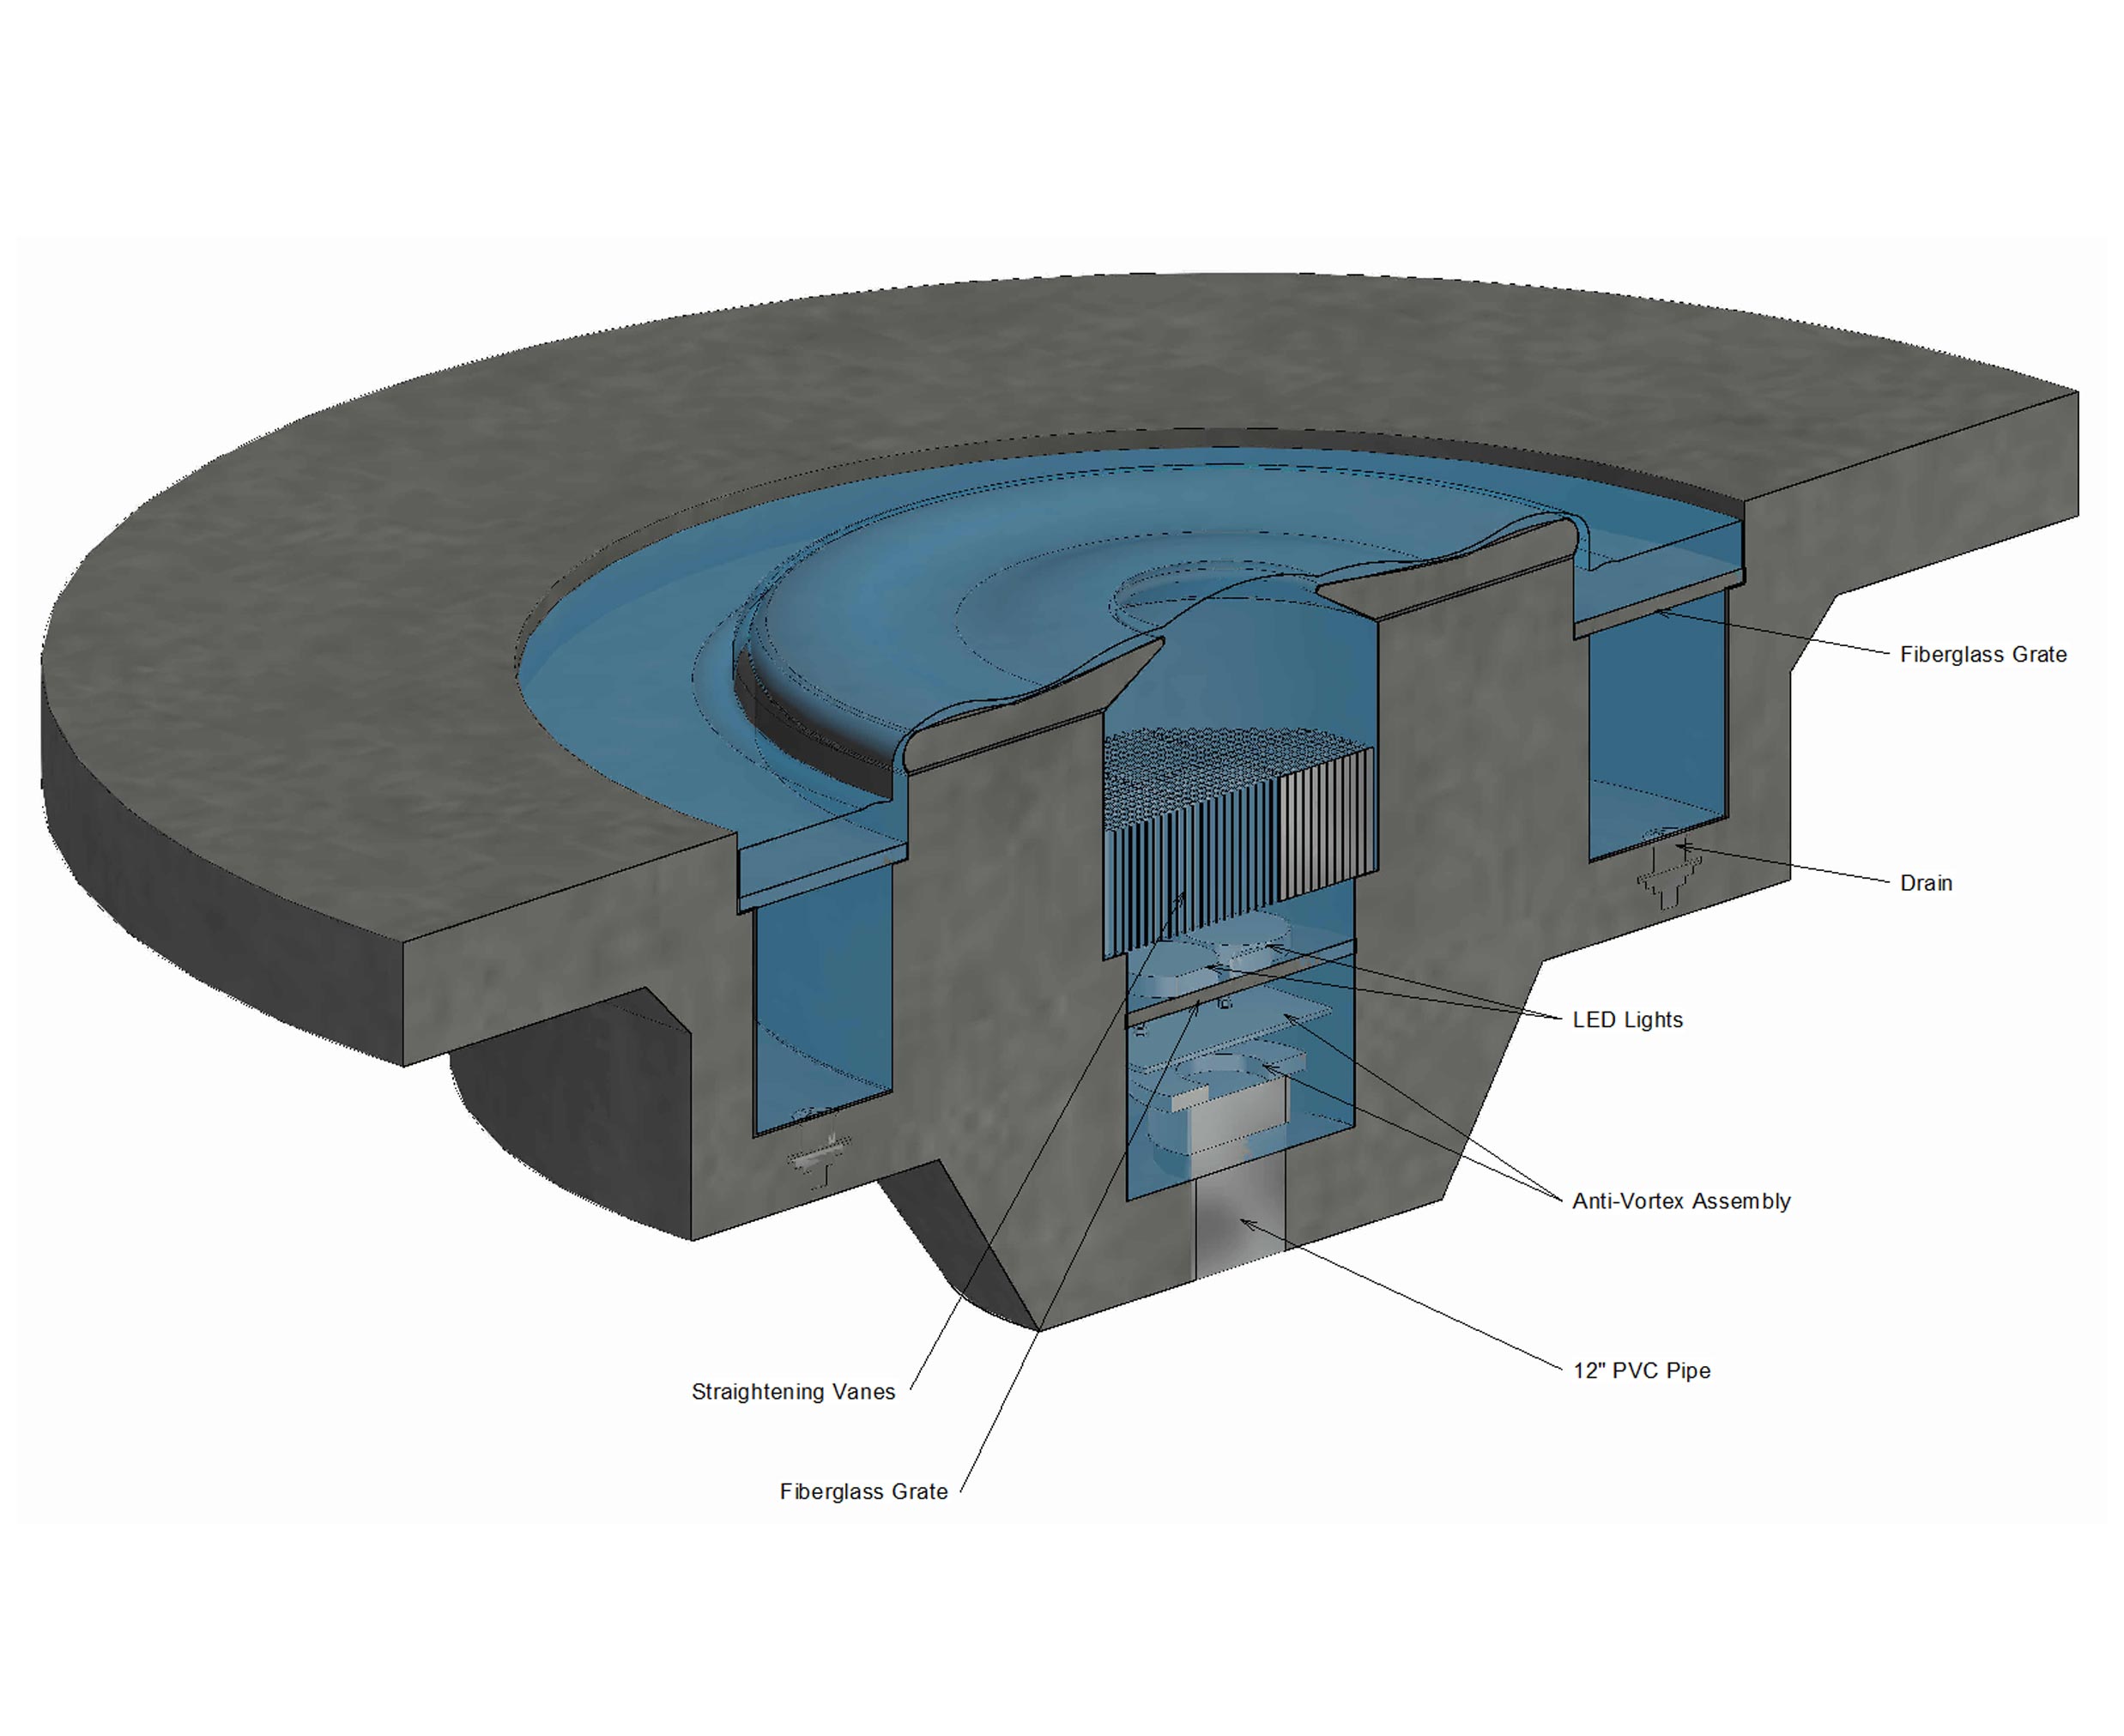 Diagram view of water feature interior